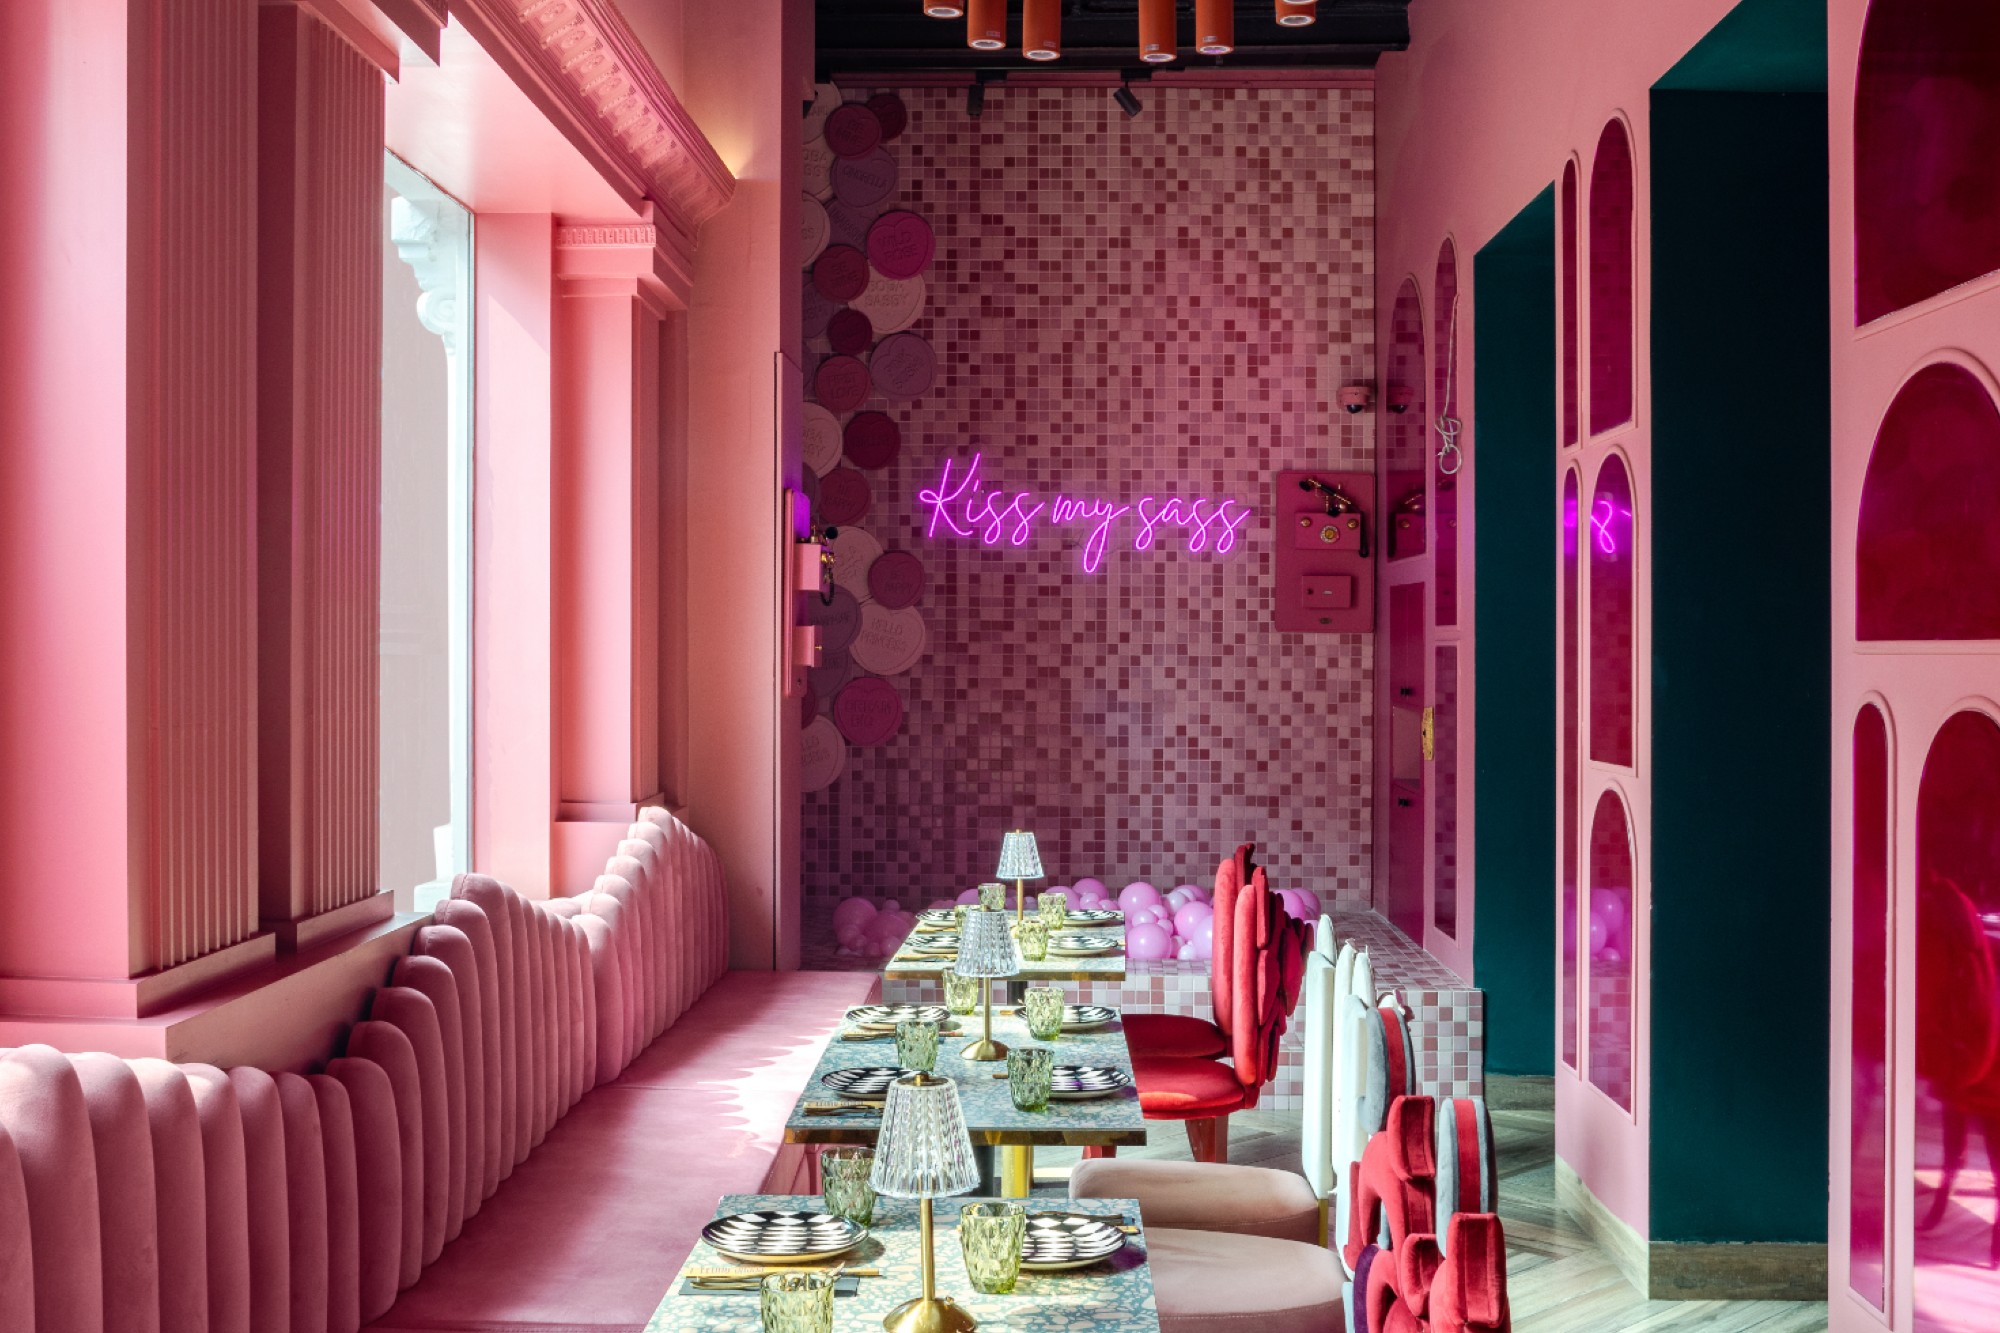 A Square Designs introduces pink restaurant